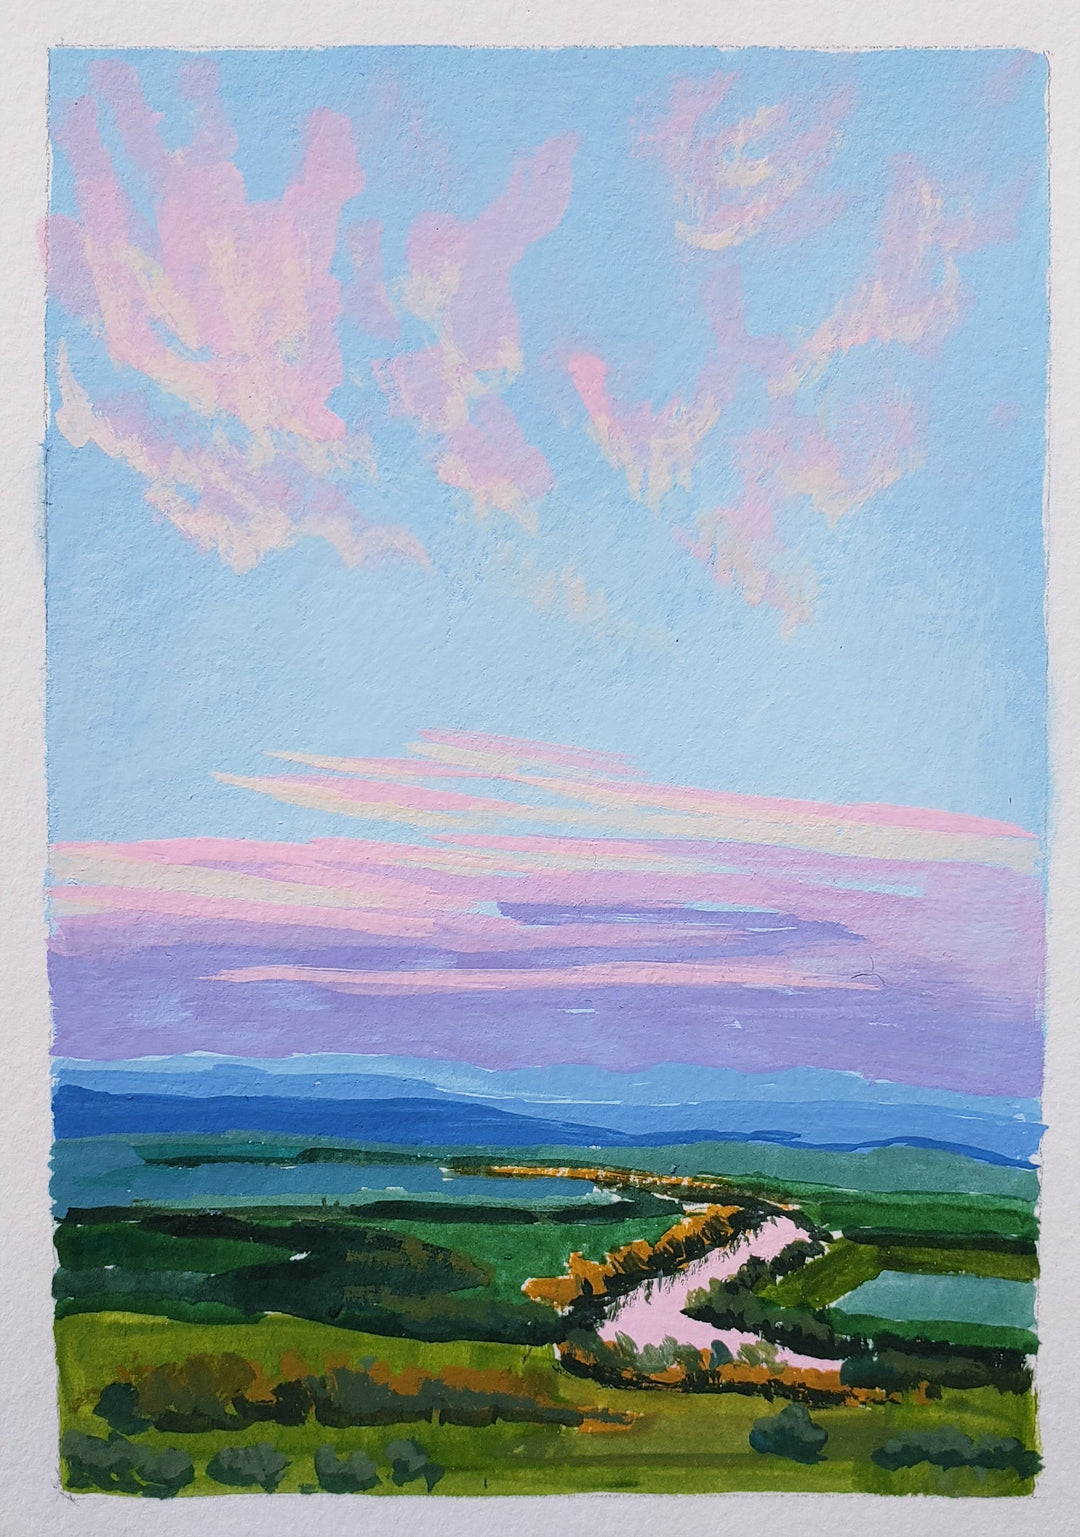 Willamette Valley by Air - mini painting